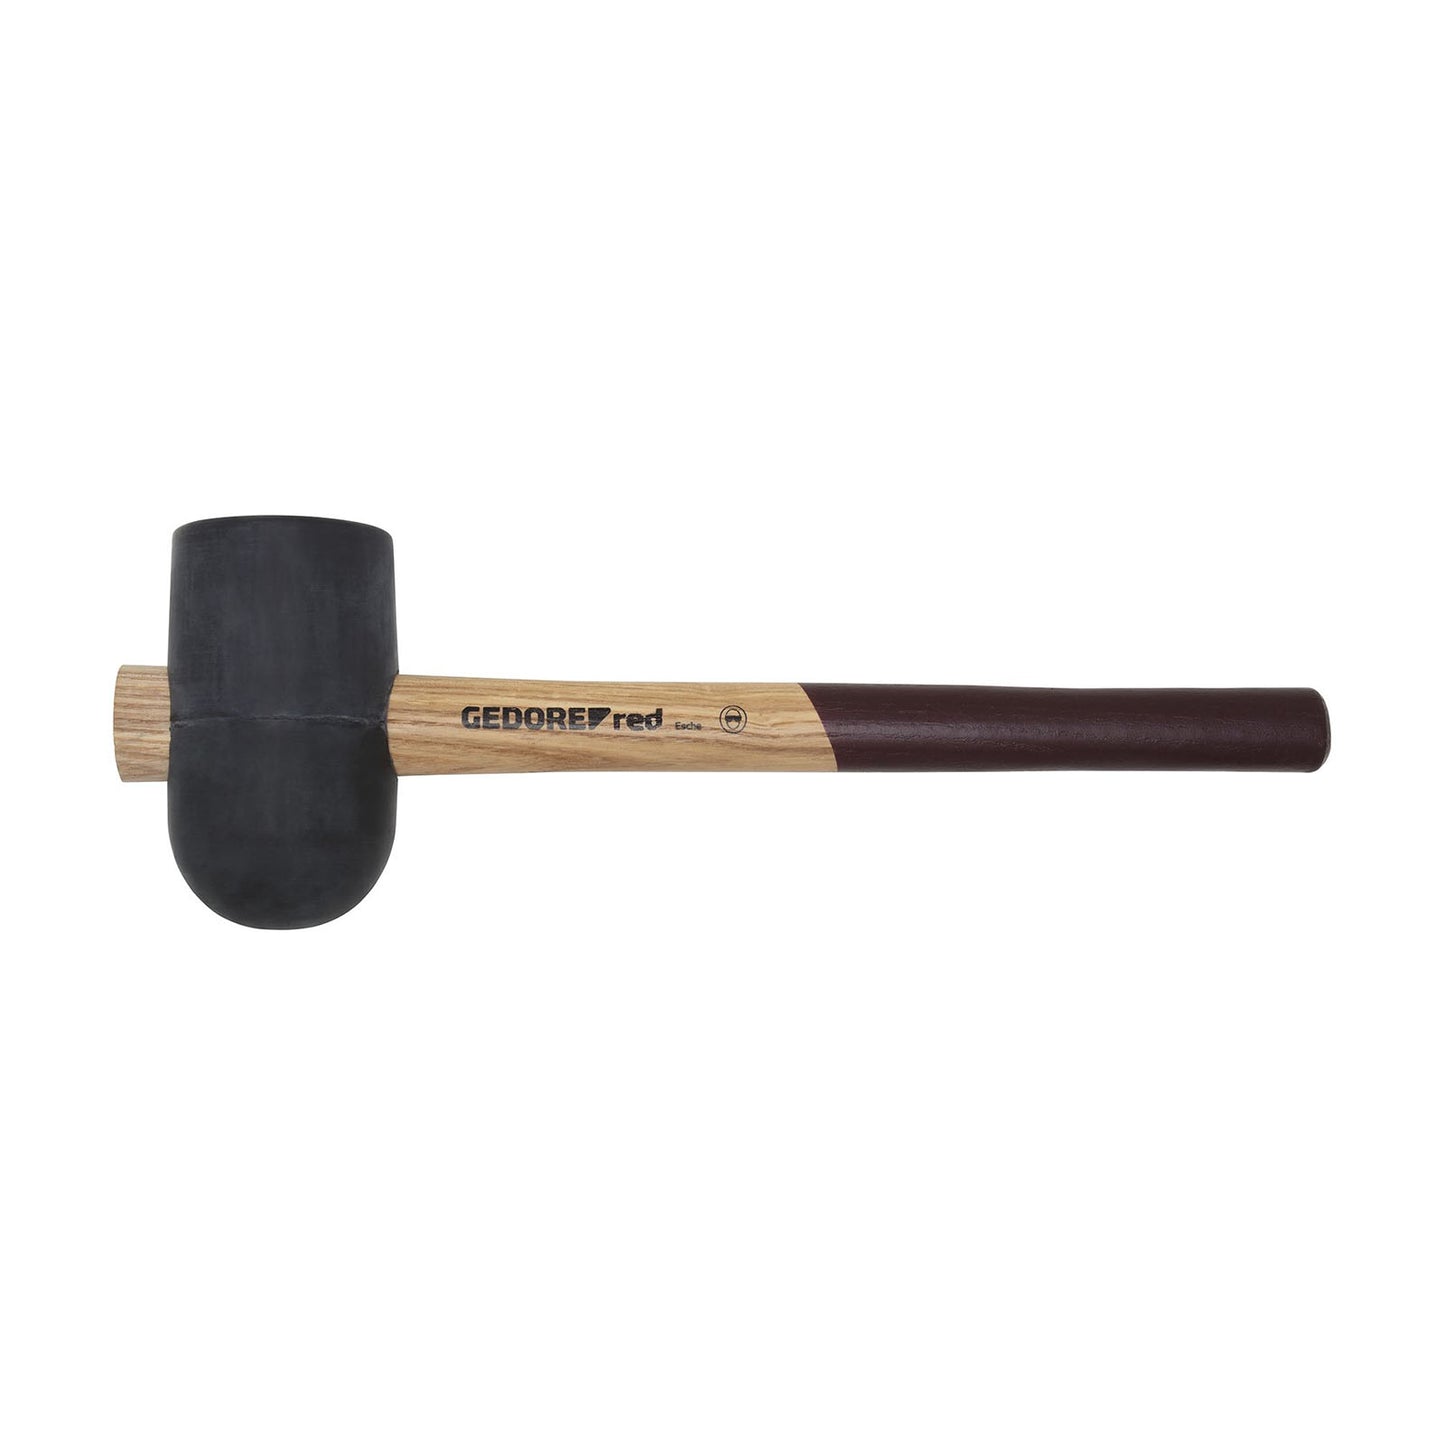 GEDORE red R92500179 - Rubber mallet, head Ø 79mm L=360 mm ash (3300741)